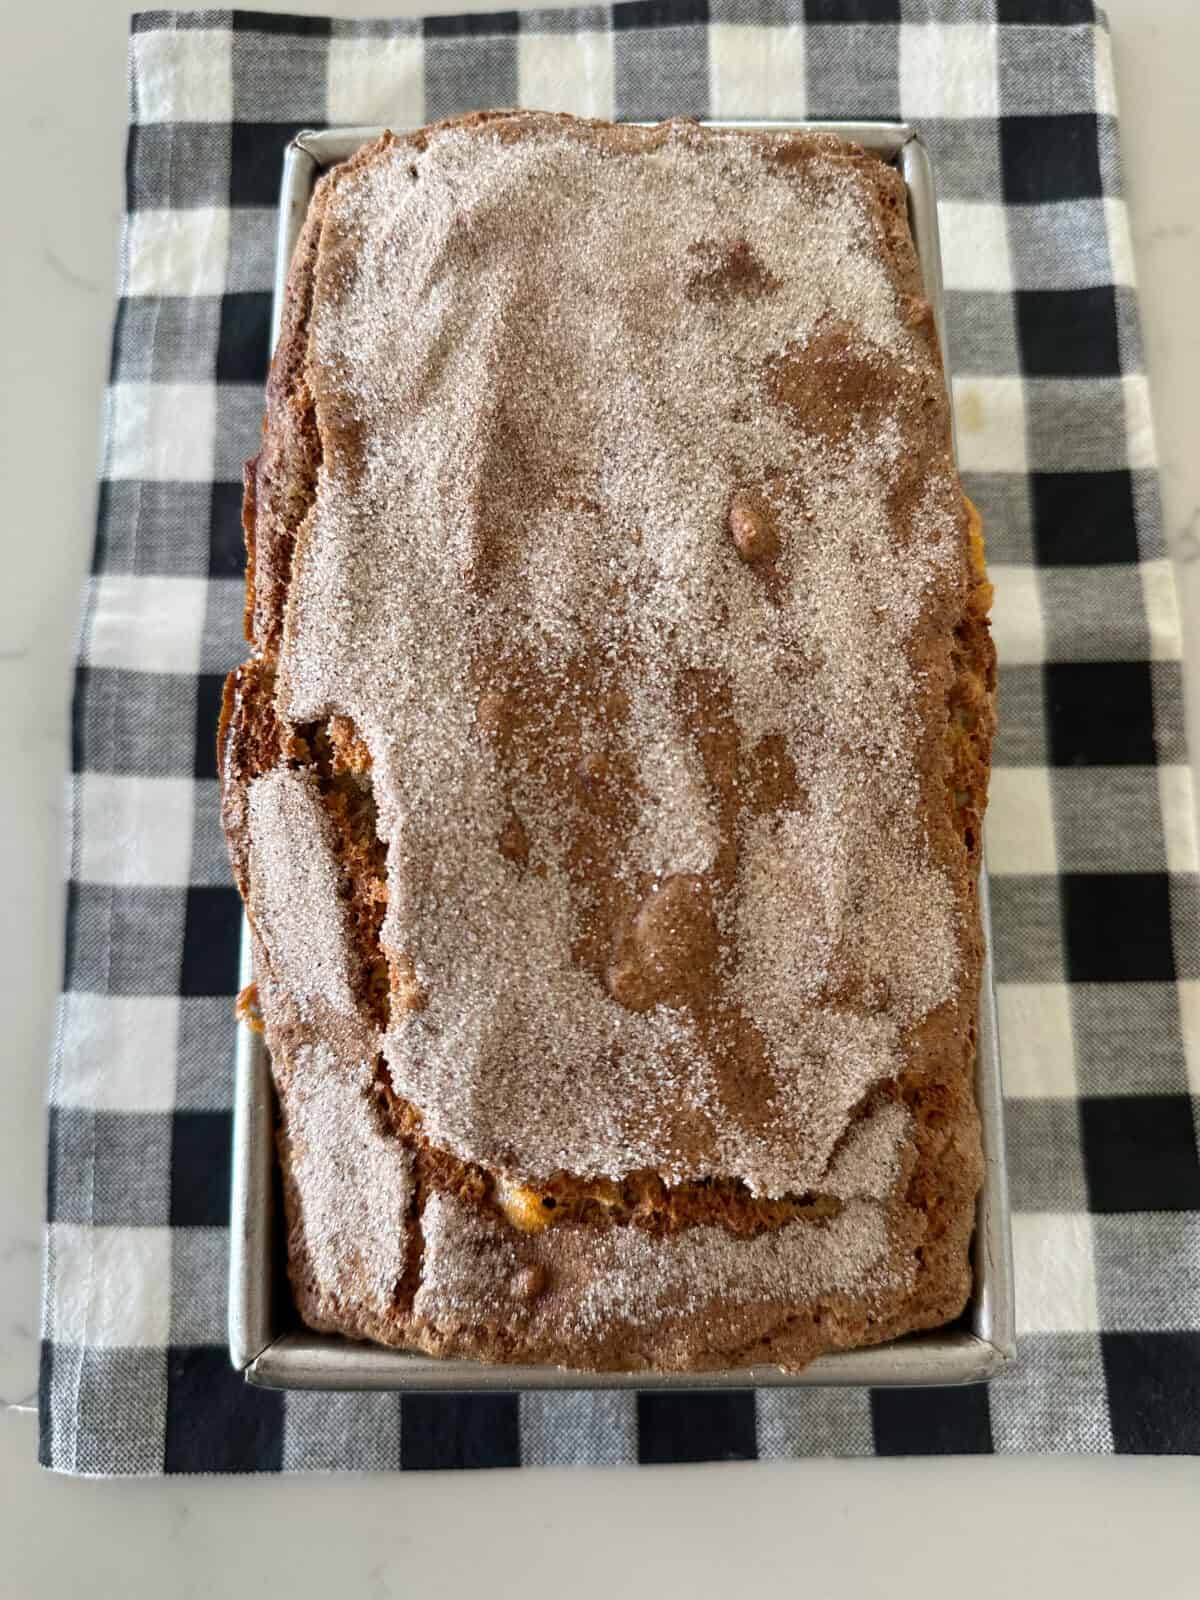 oatmeal banana bread baked in loaf pan on counter